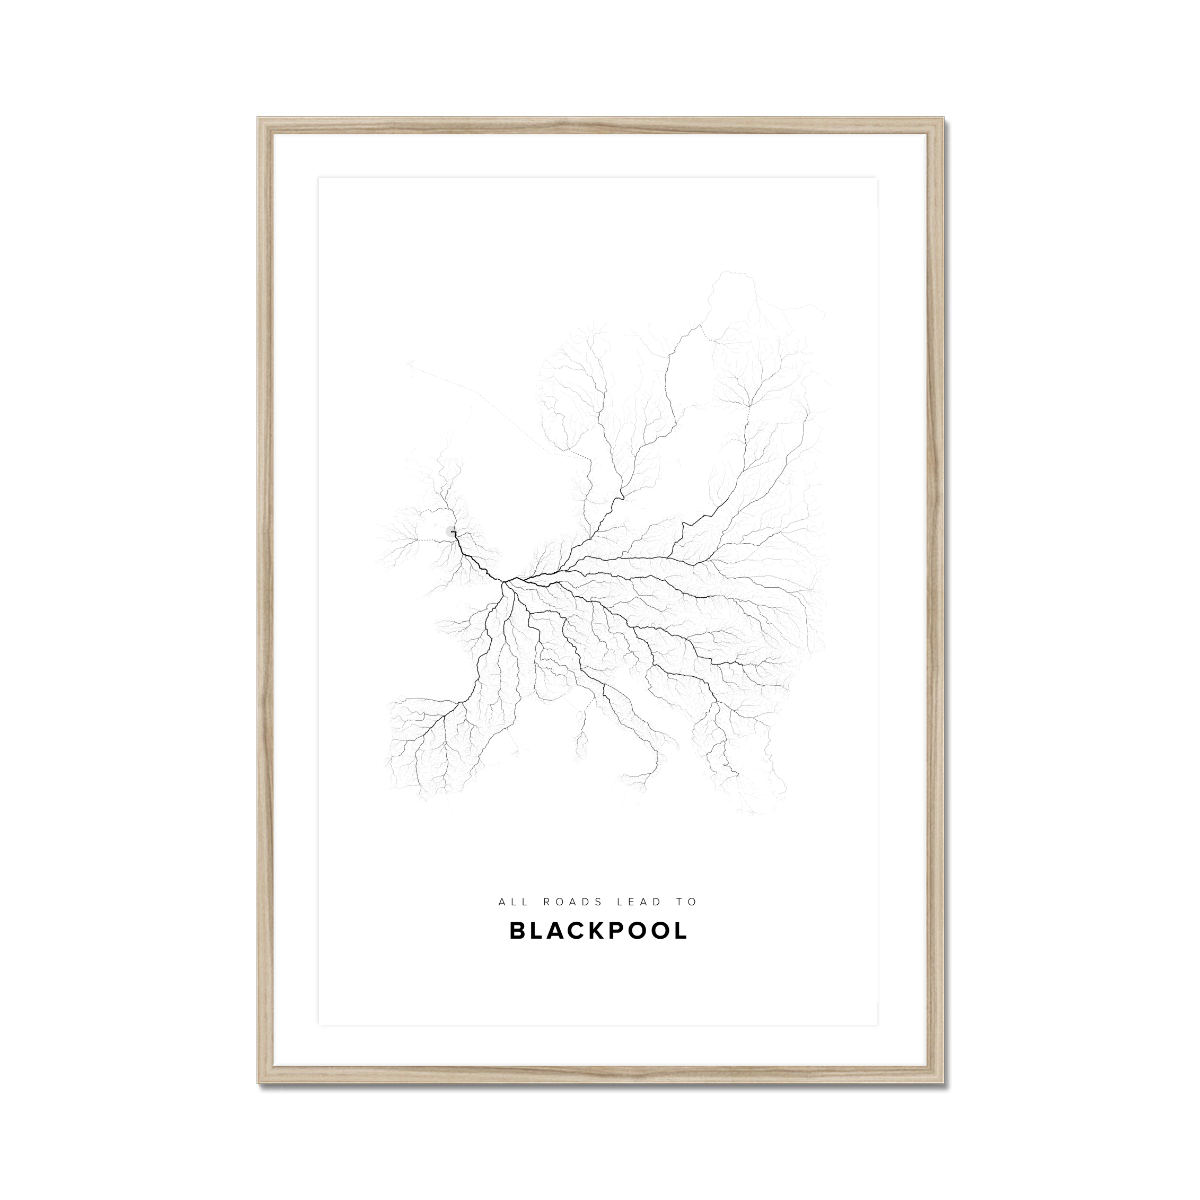 All roads lead to Blackpool (United Kingdom of Great Britain and Northern Ireland) Fine Art Map Print